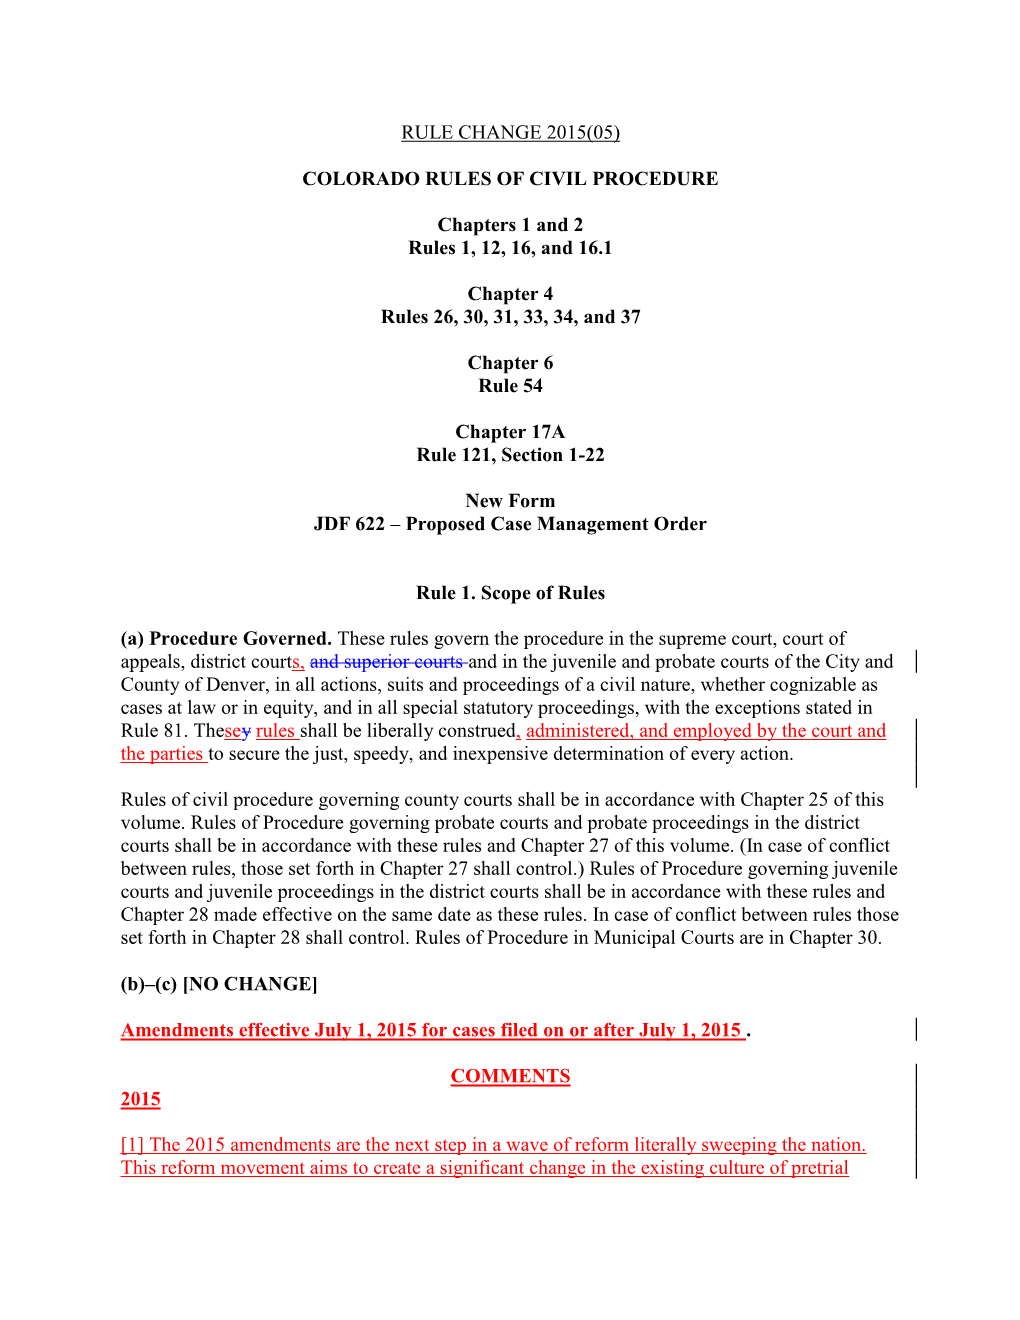 COLORADO RULES of CIVIL PROCEDURE Chapters 1 and 2